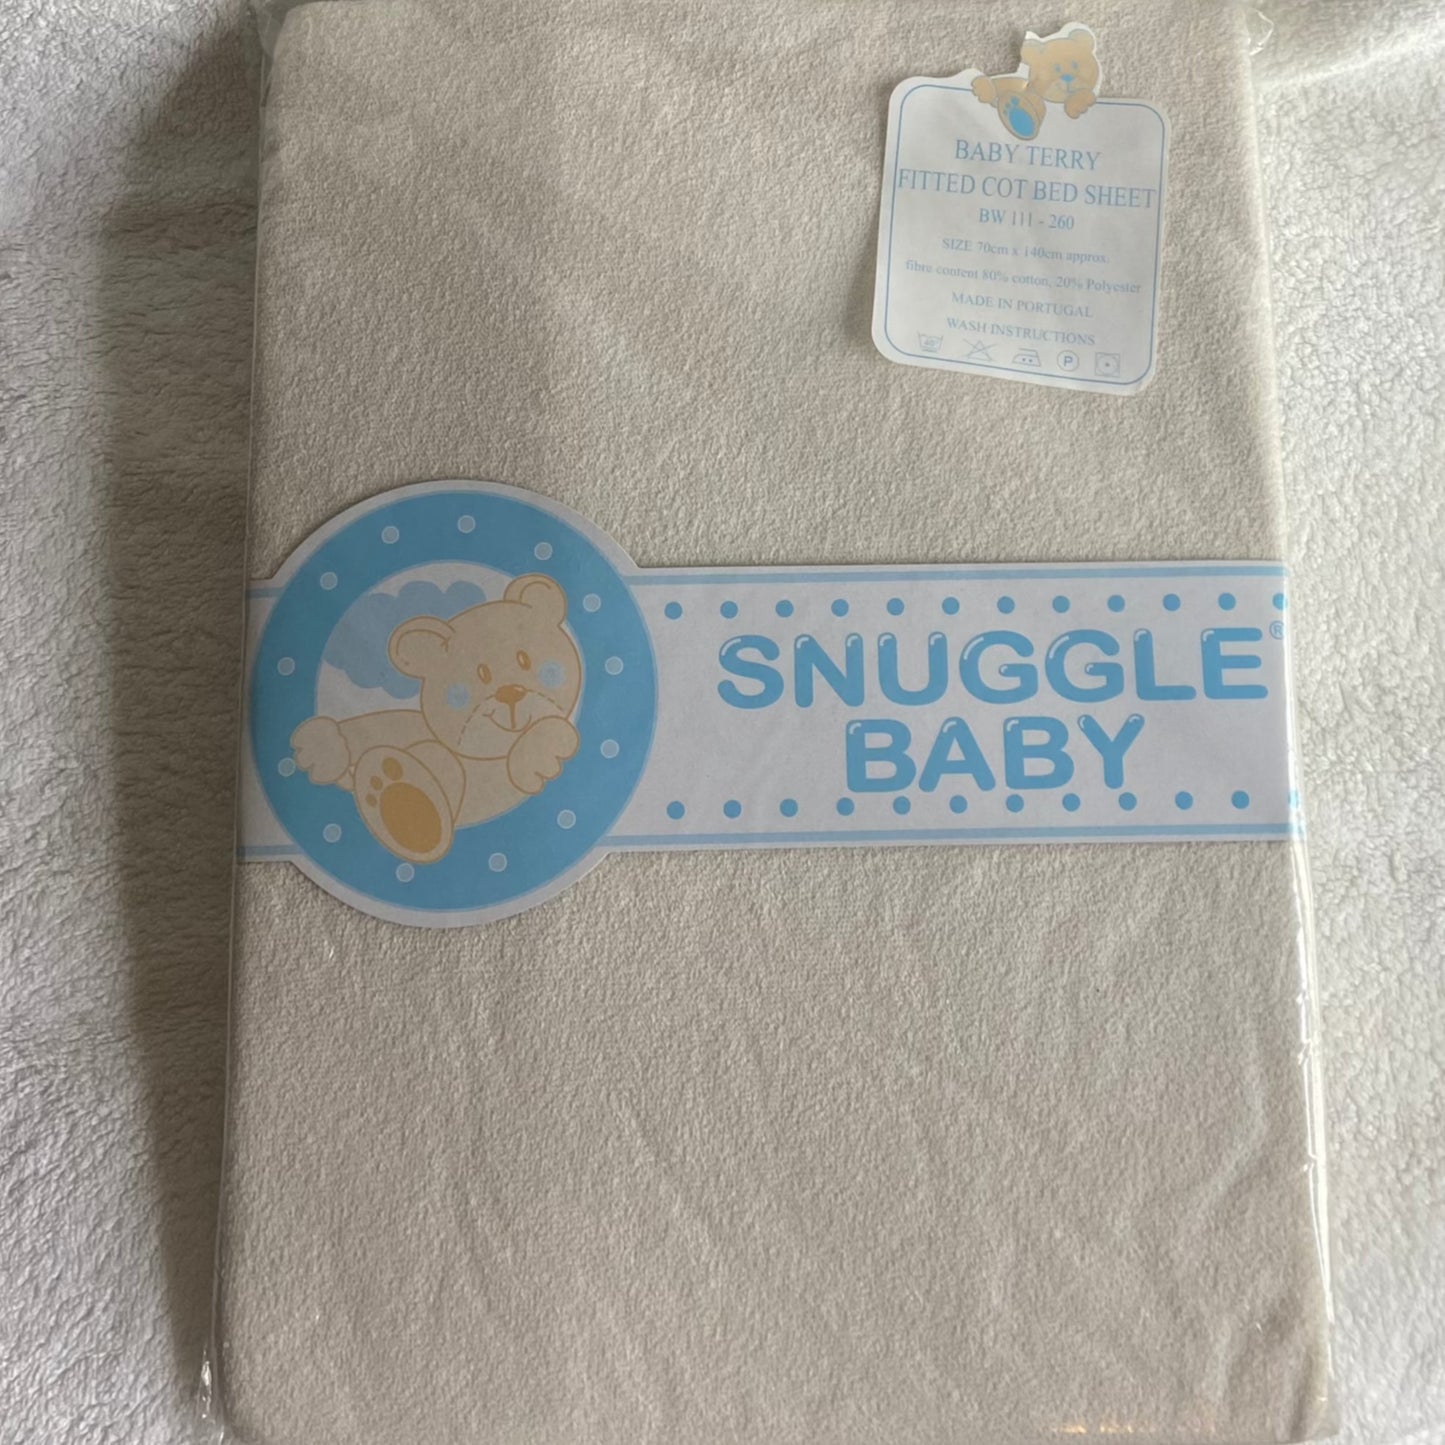 Fitted Cot Bed Sheet by Snuggle Baby